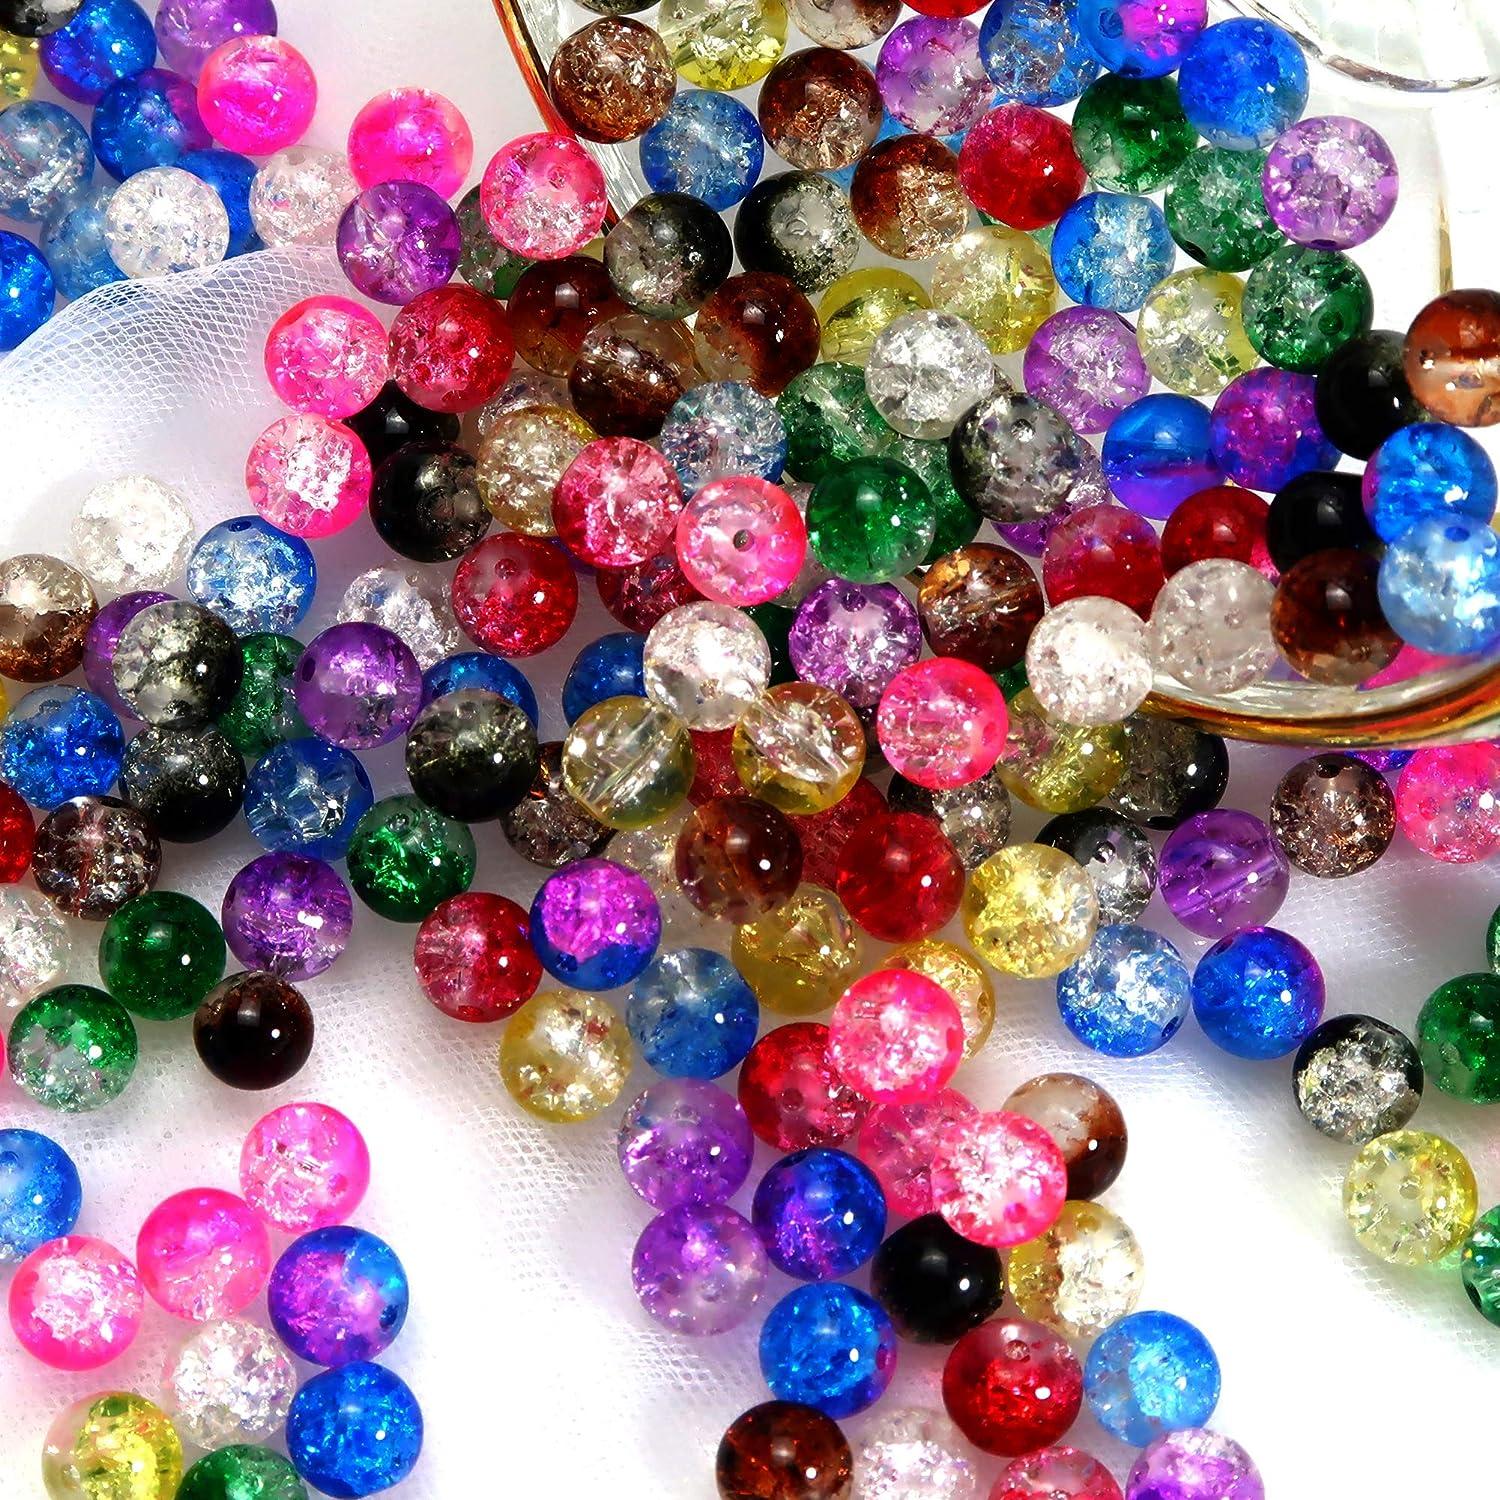 New 200pcs Round Cracked Glass Beads 8mm Assorted Crystal Beads